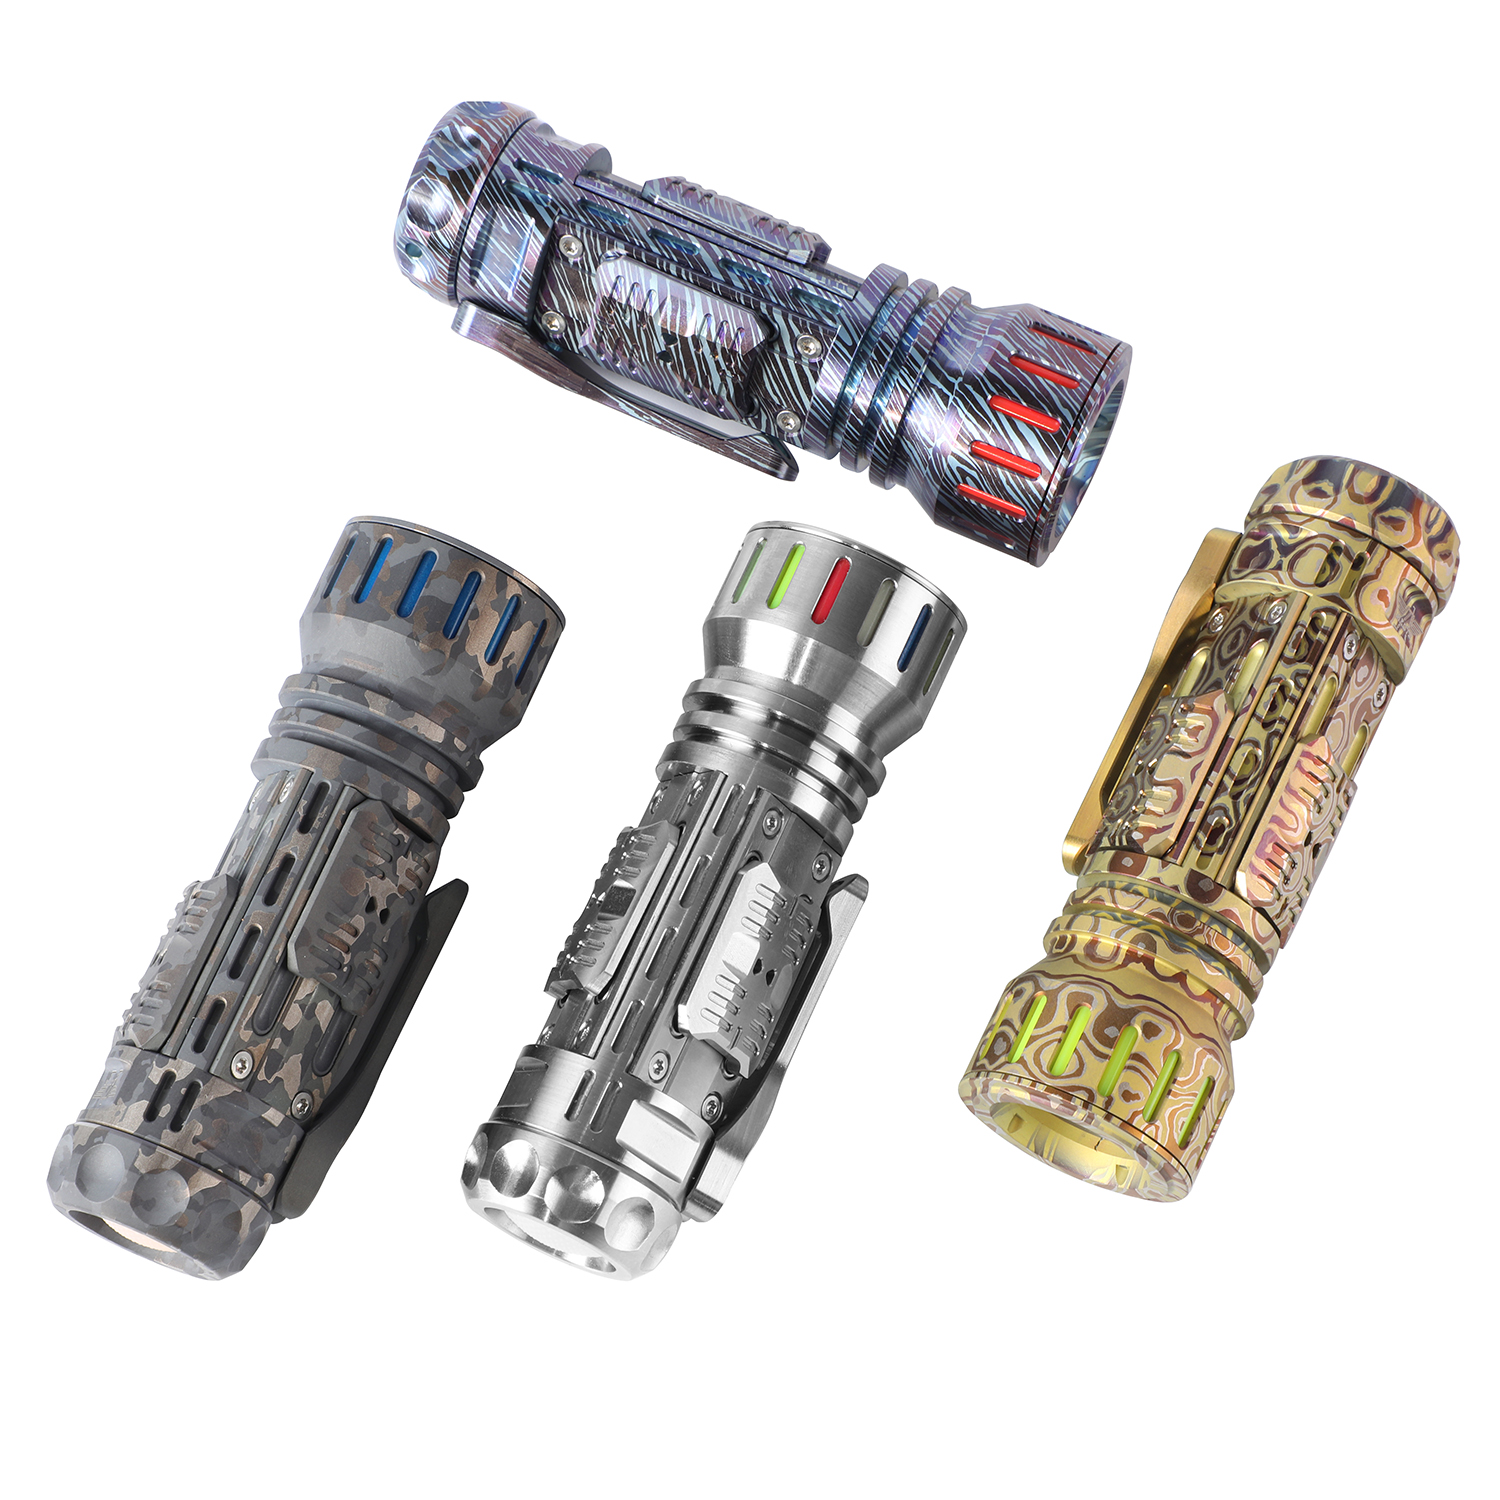 Find MEOTE FM2 SFS80 2360lm 225m EDC Titanium Flashlight with New UI 14500 Battery Mini LED Torch Tactical Survival Tools EDC Collections For Outdoor Camping Hunting Fishing for Sale on Gipsybee.com with cryptocurrencies